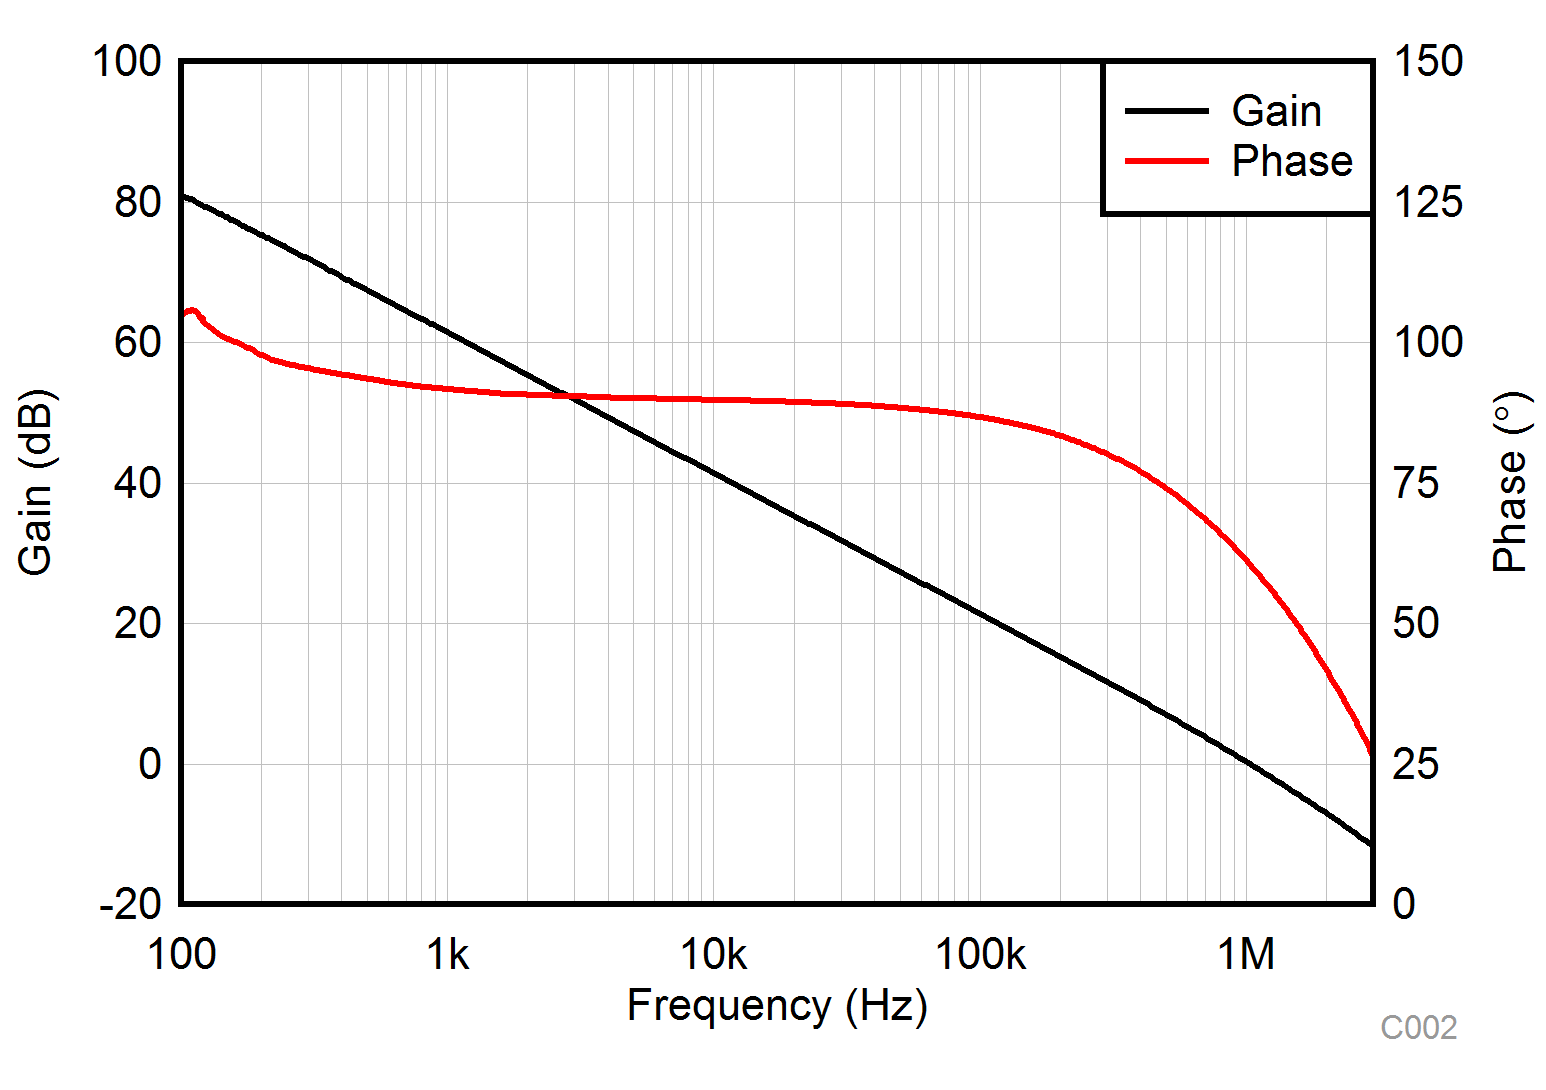 TLV9104-Q1 Open-Loop Gain
            and Phase vs Frequency